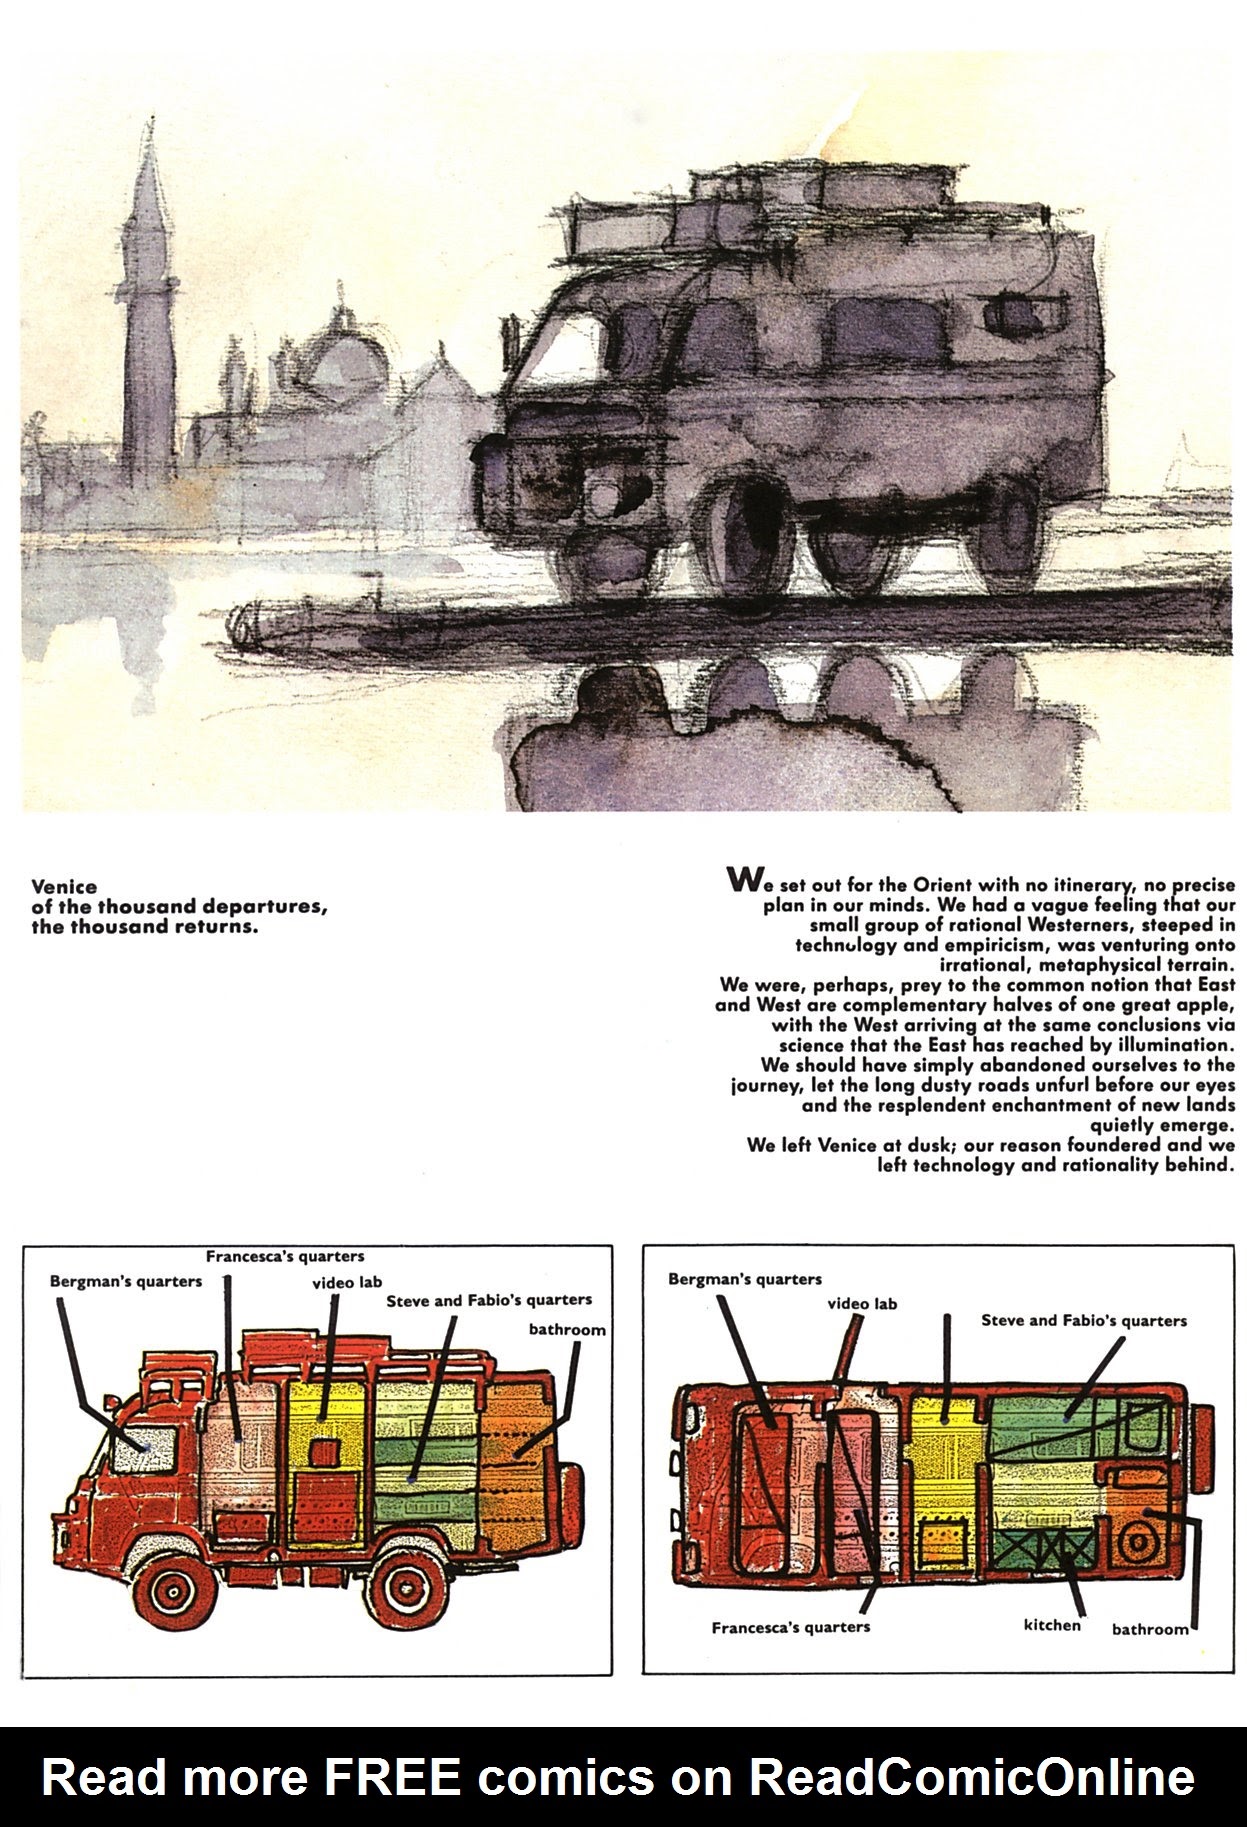 Read online Perchance to dream - The Indian adventures of Giuseppe Bergman comic -  Issue # TPB - 6